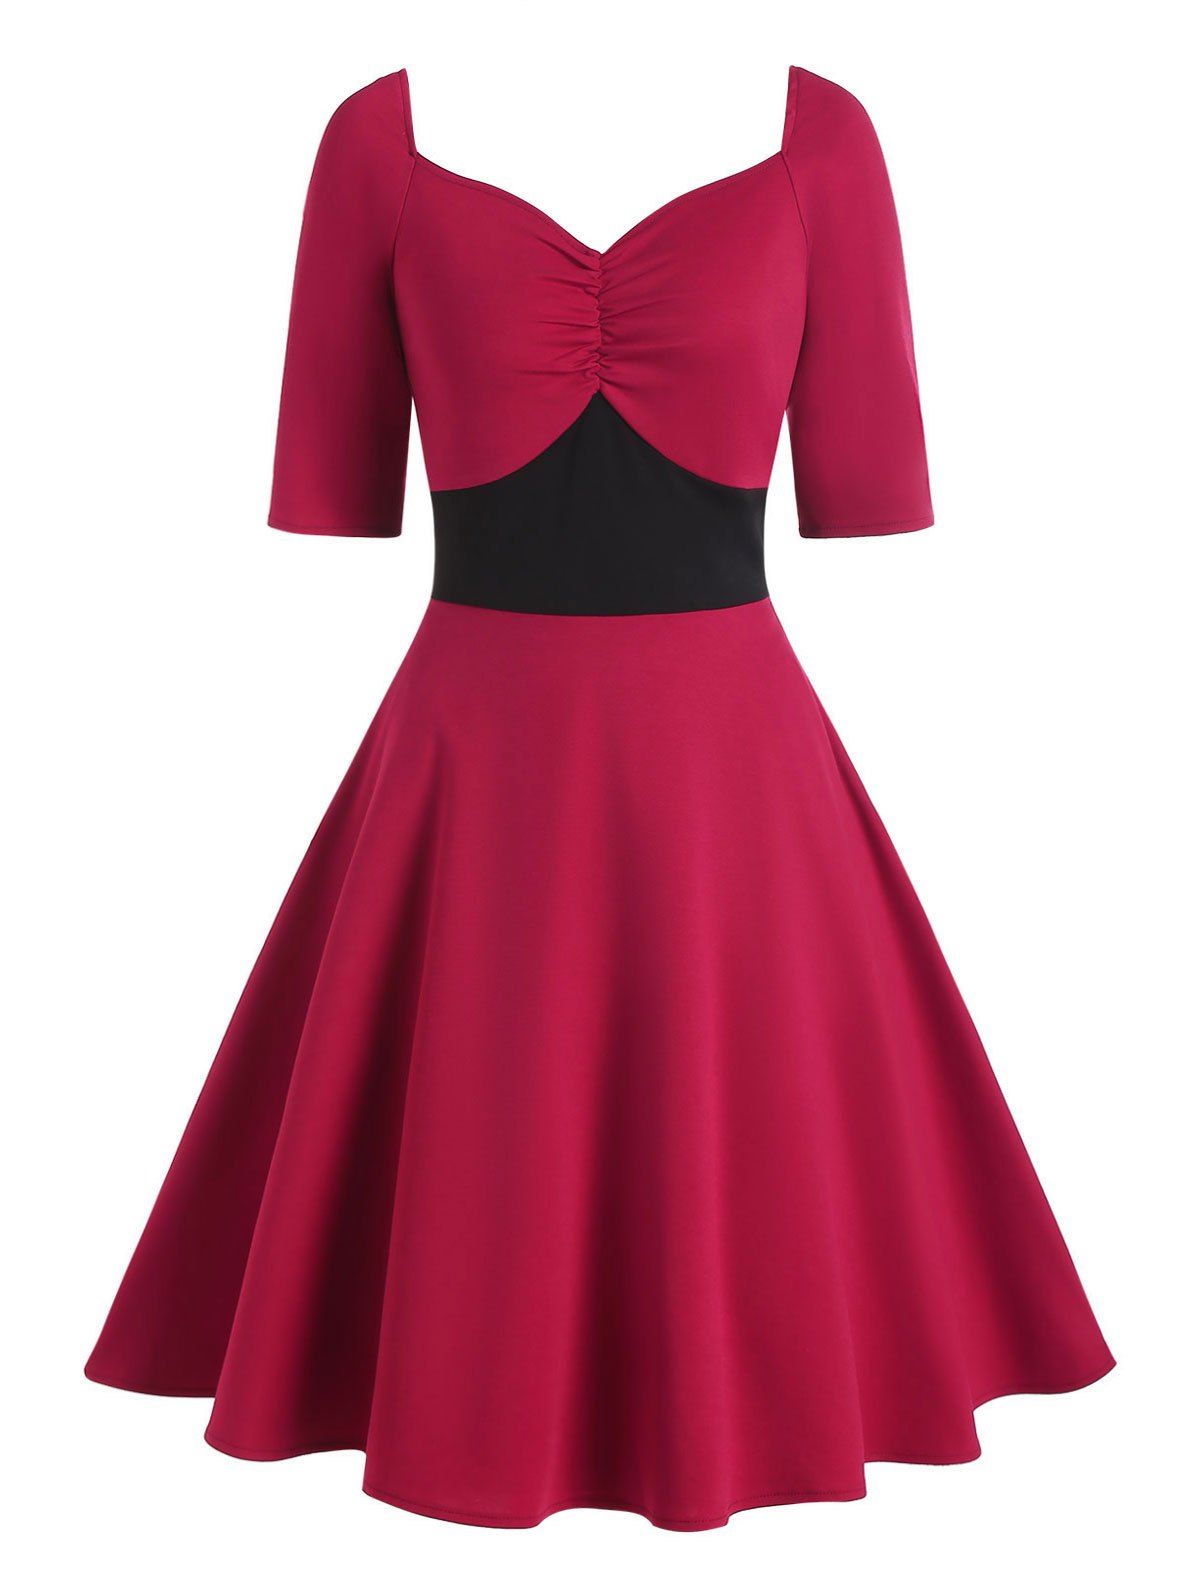 uched Colorblock Empire Waist Dress 